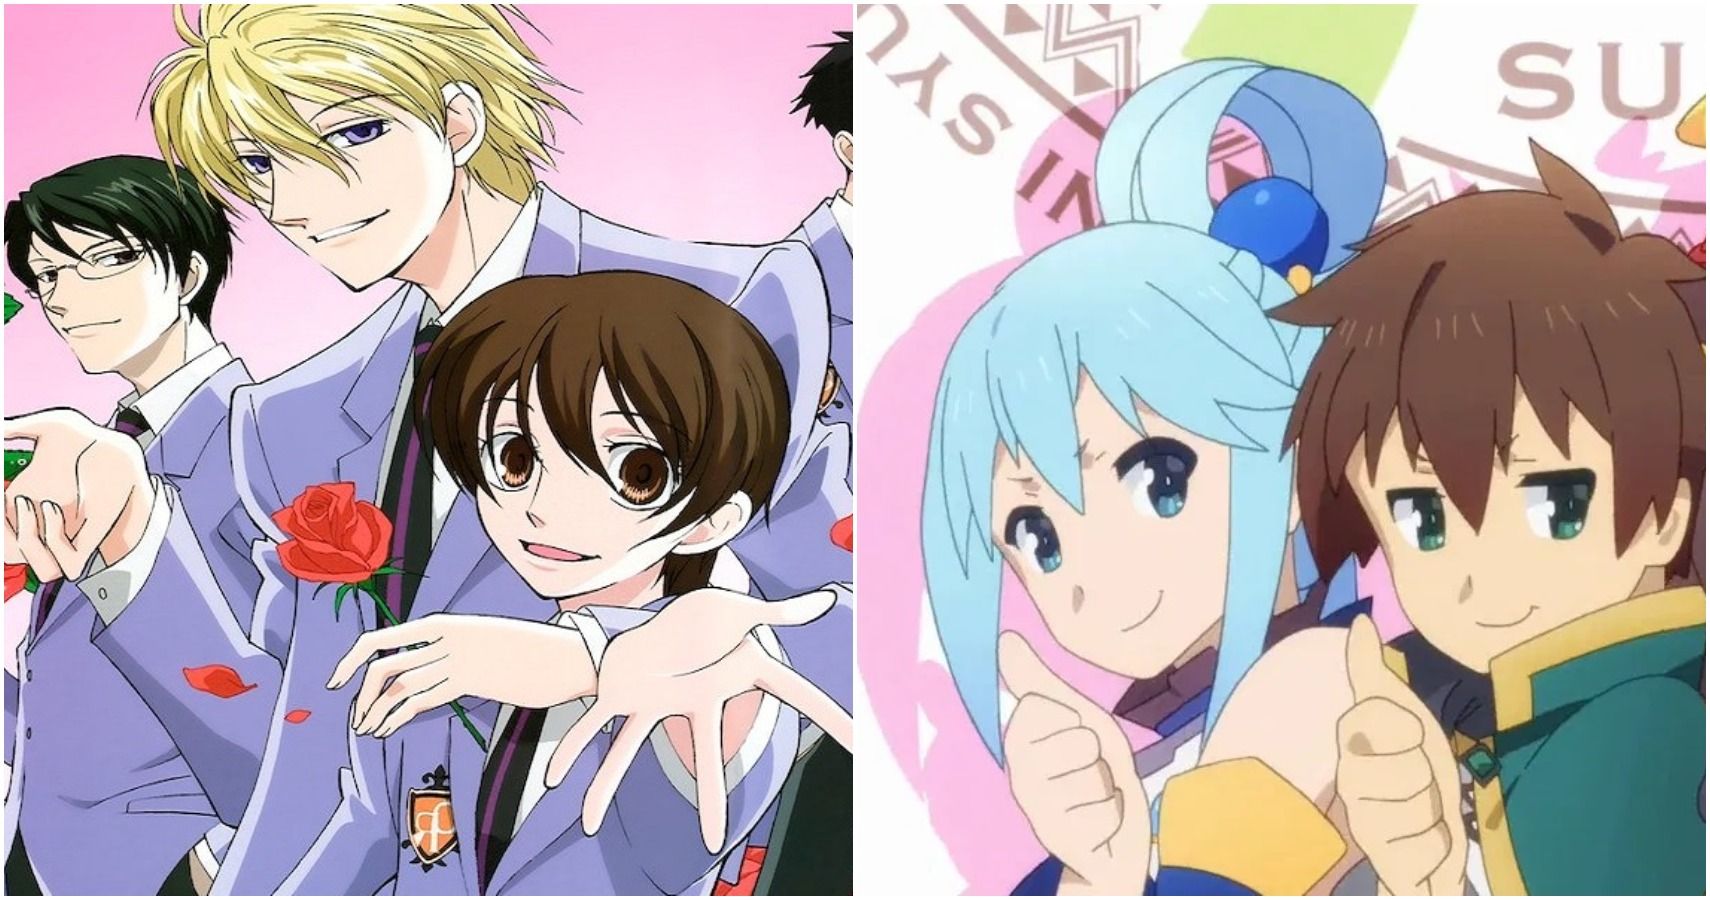 The 10 Most Popular Comedy Anime (According to MyAnimeList)